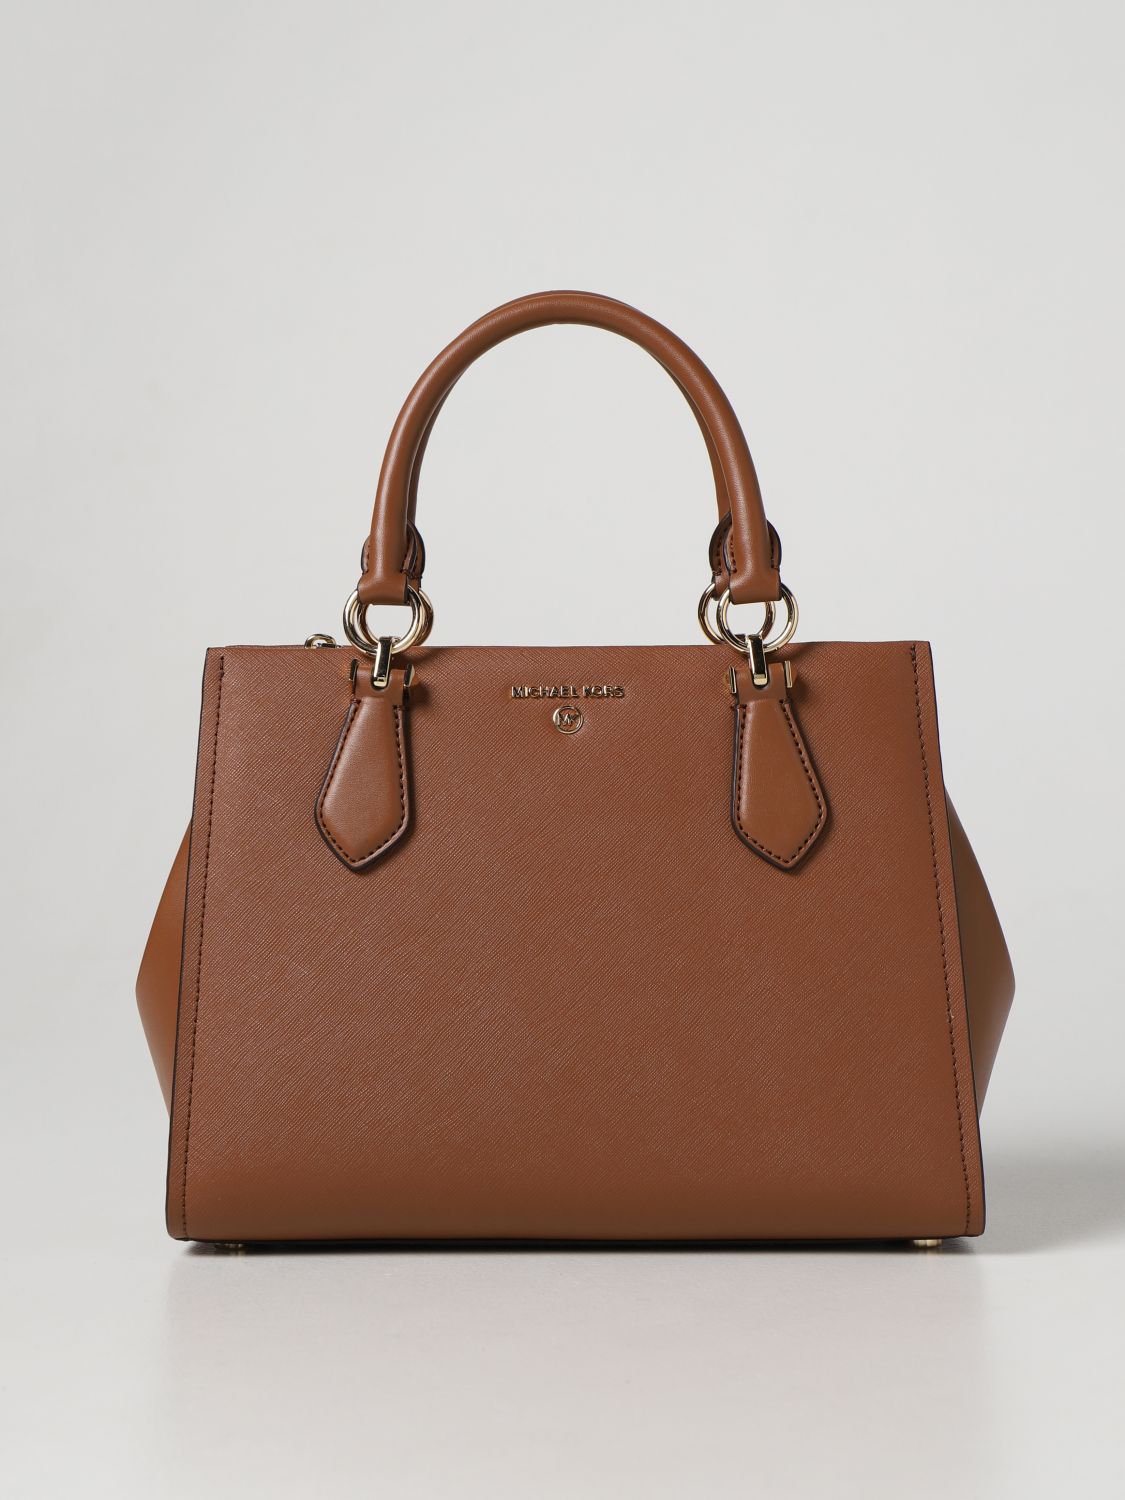 The Michael Kors Large Marilyn Satchel in the color block saffiano